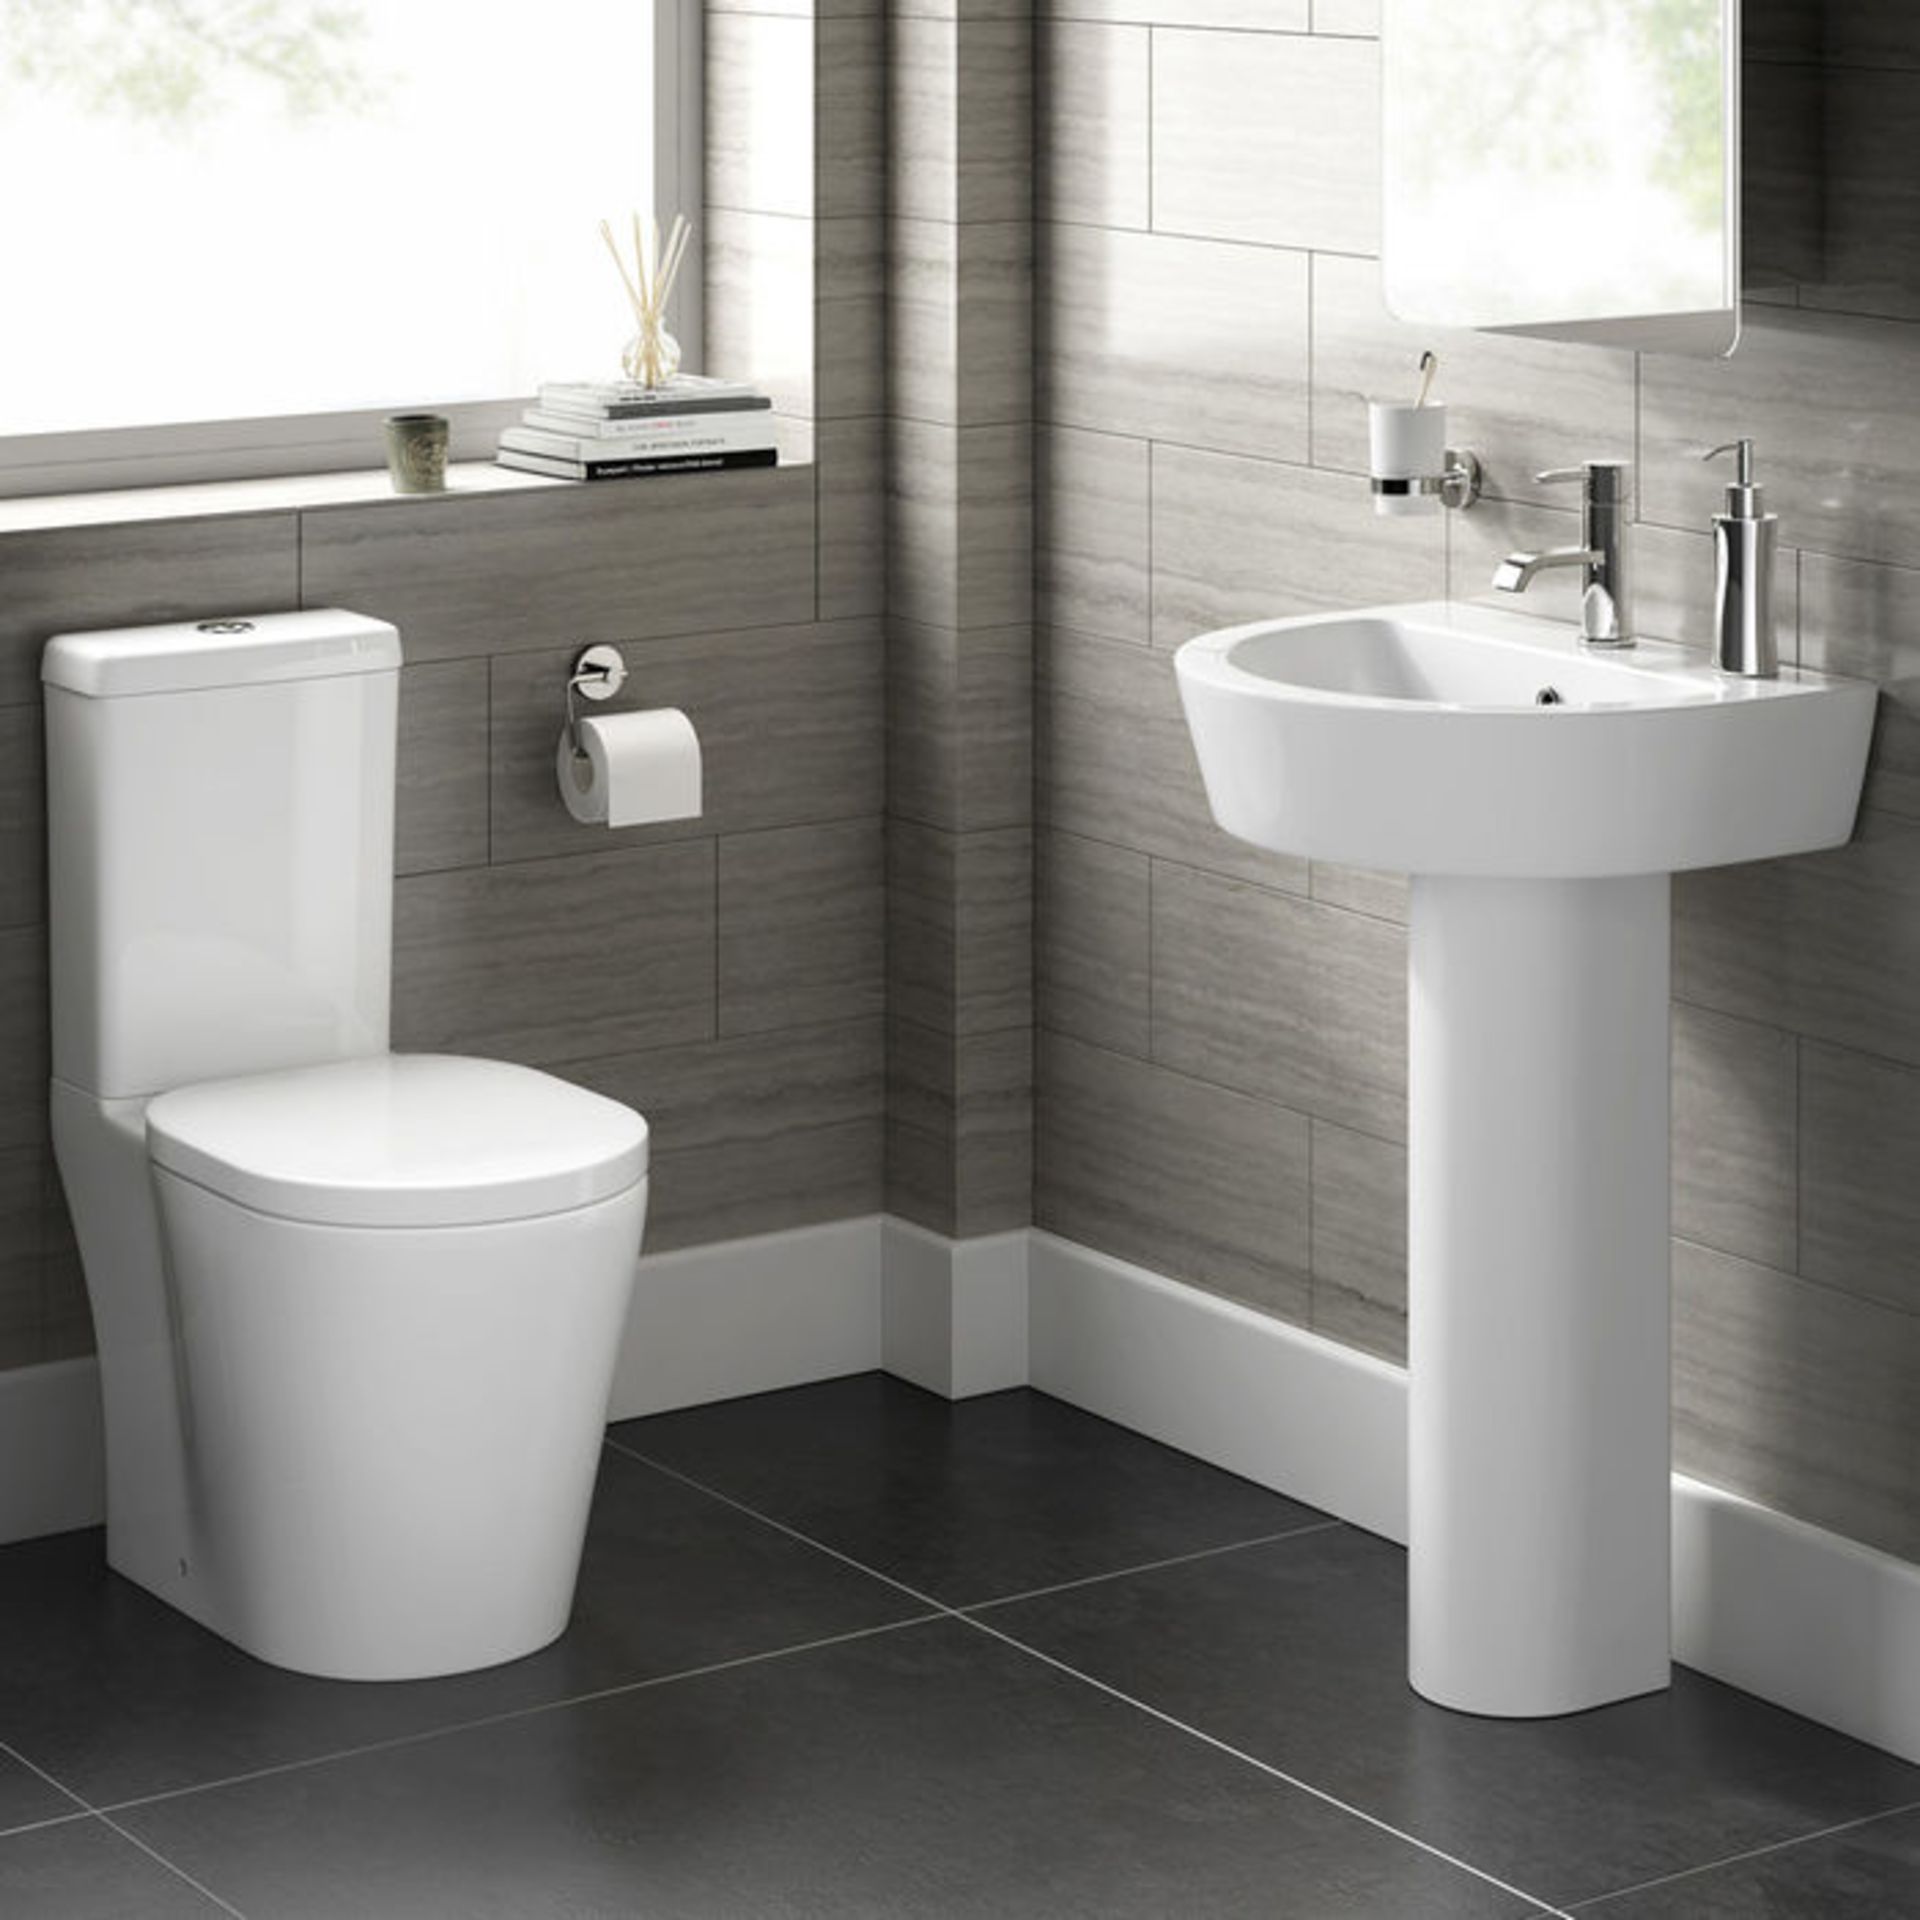 (MT54) Albi Close Coupled Toilet & Cistern inc Soft Close Seat This innovative toilet is the - Image 4 of 4